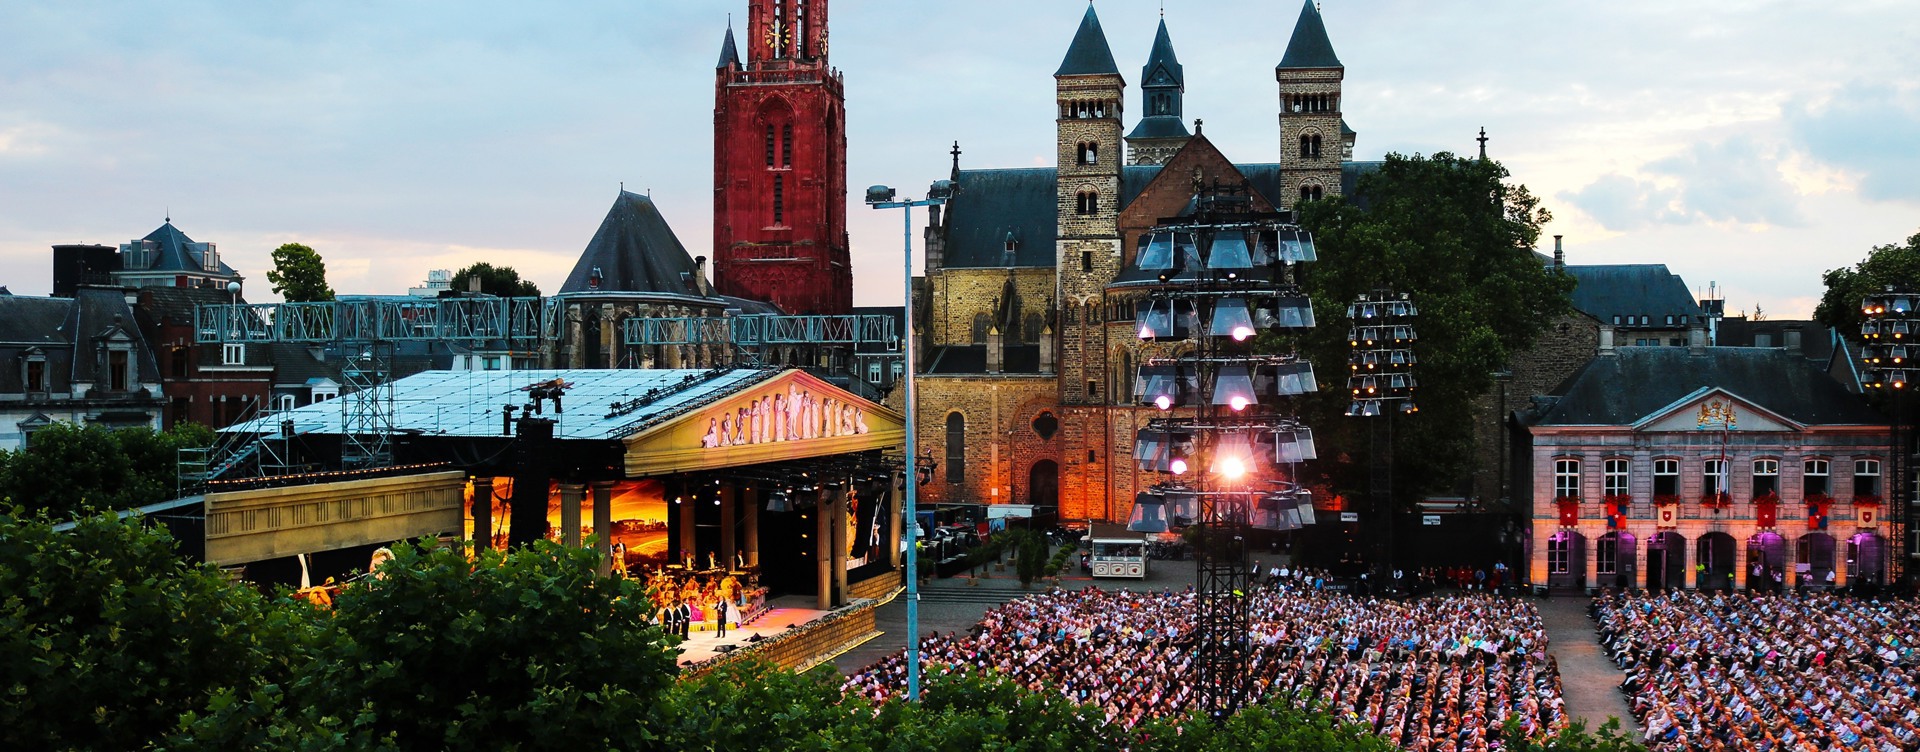 Enjoy the traditional summer evening concerts 
of André Rieu in Maastricht